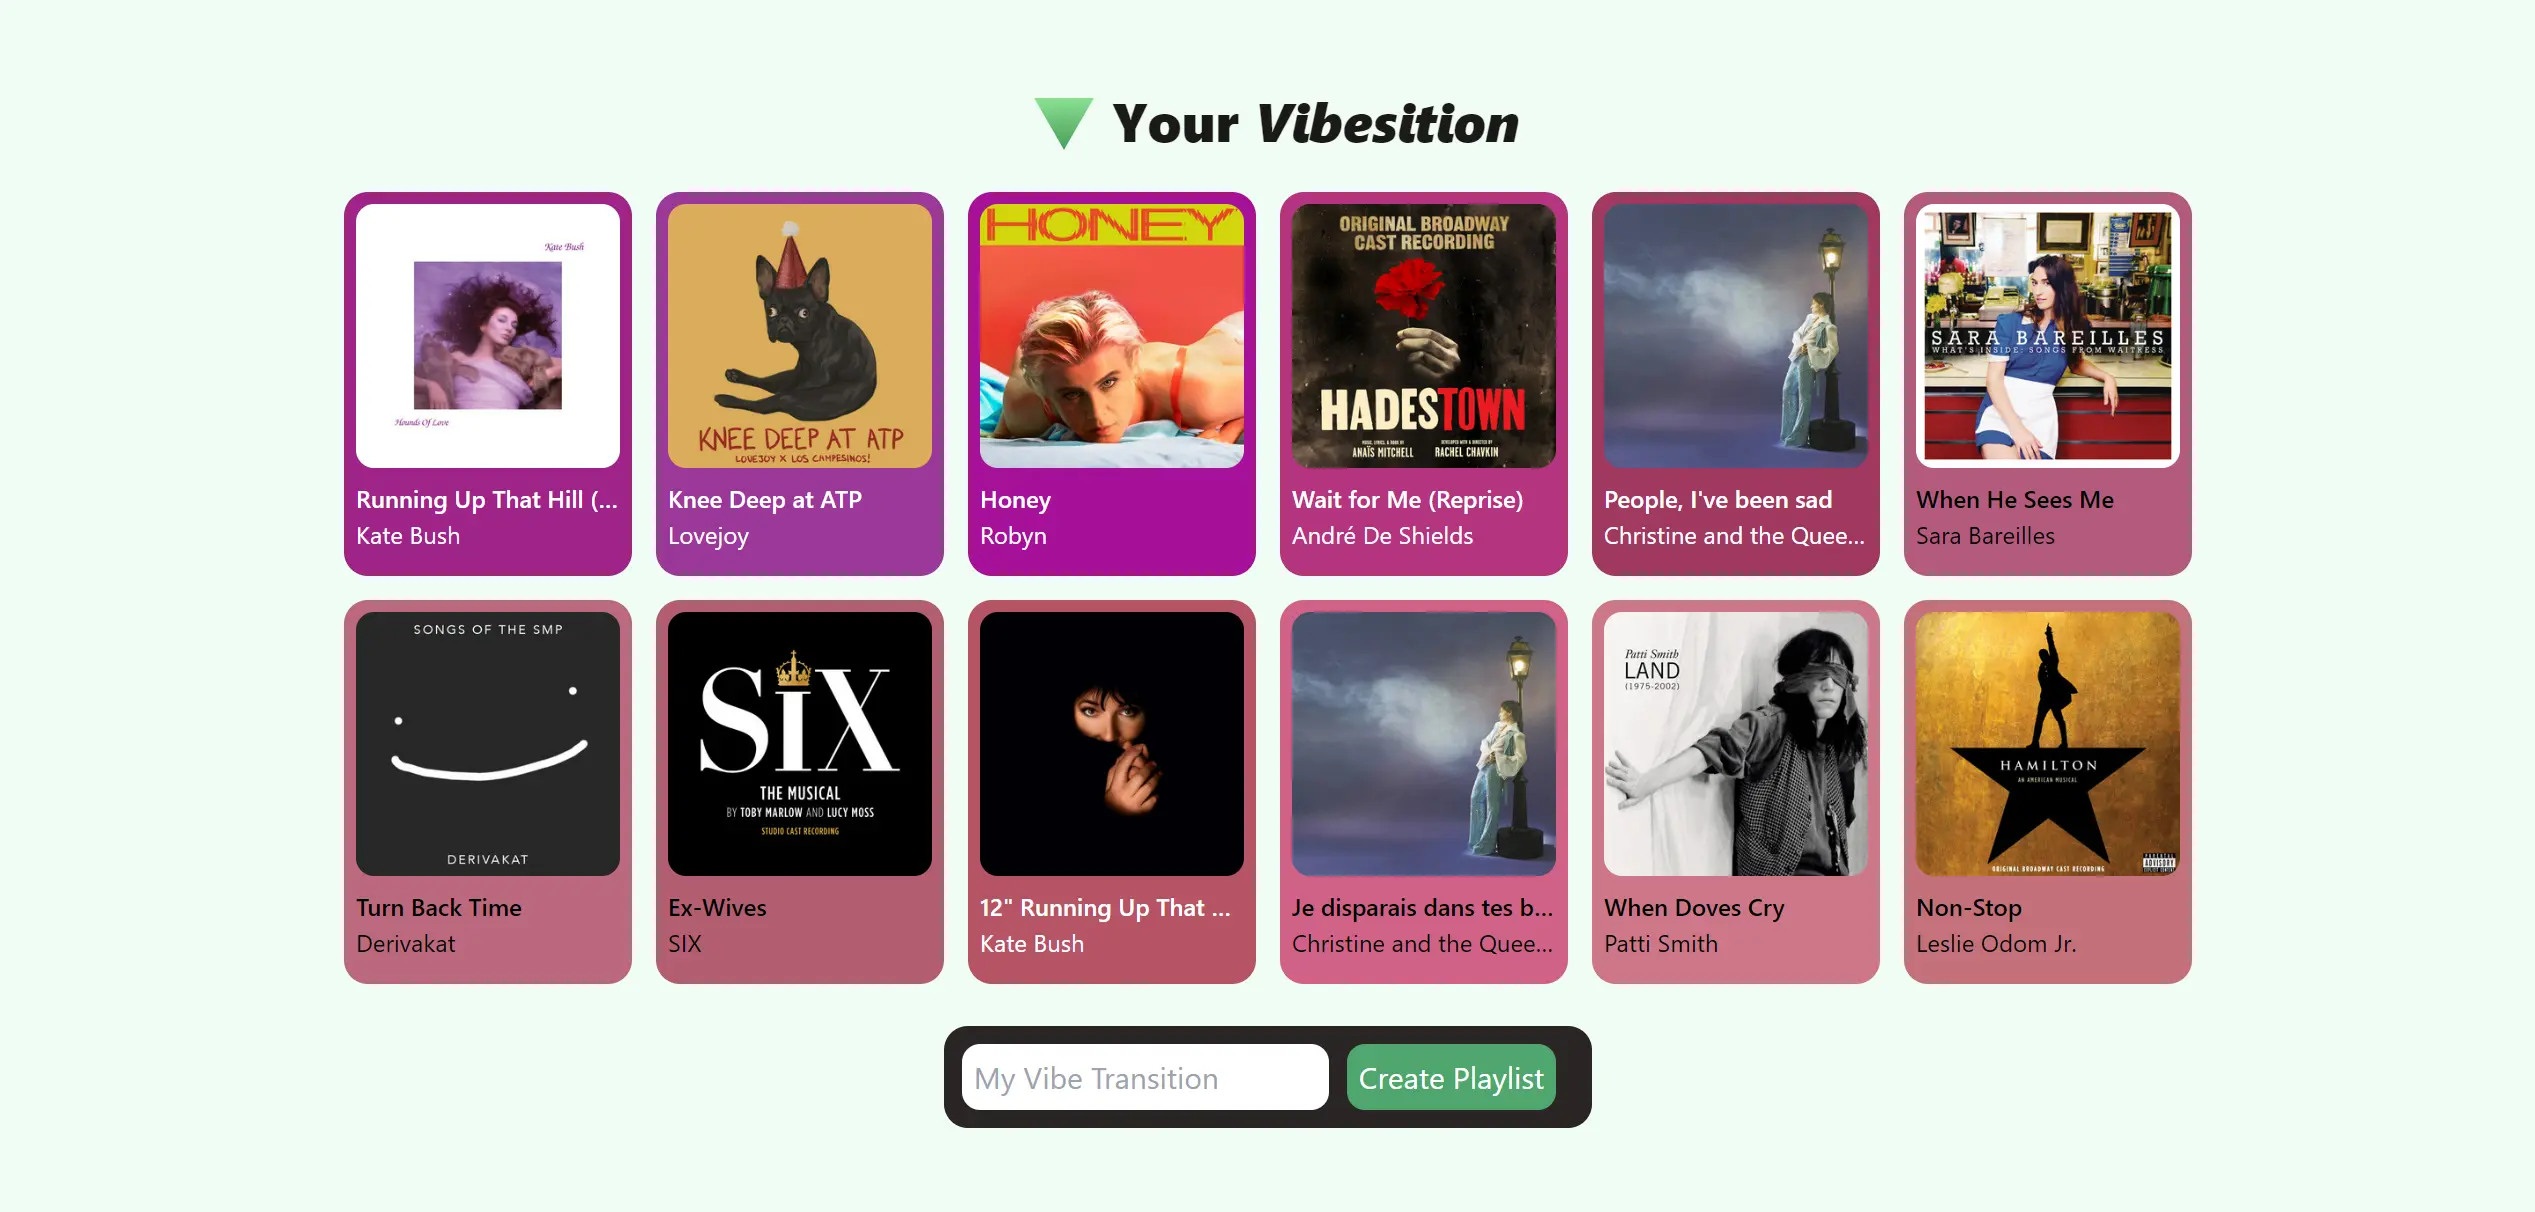 The results page of Vibesition